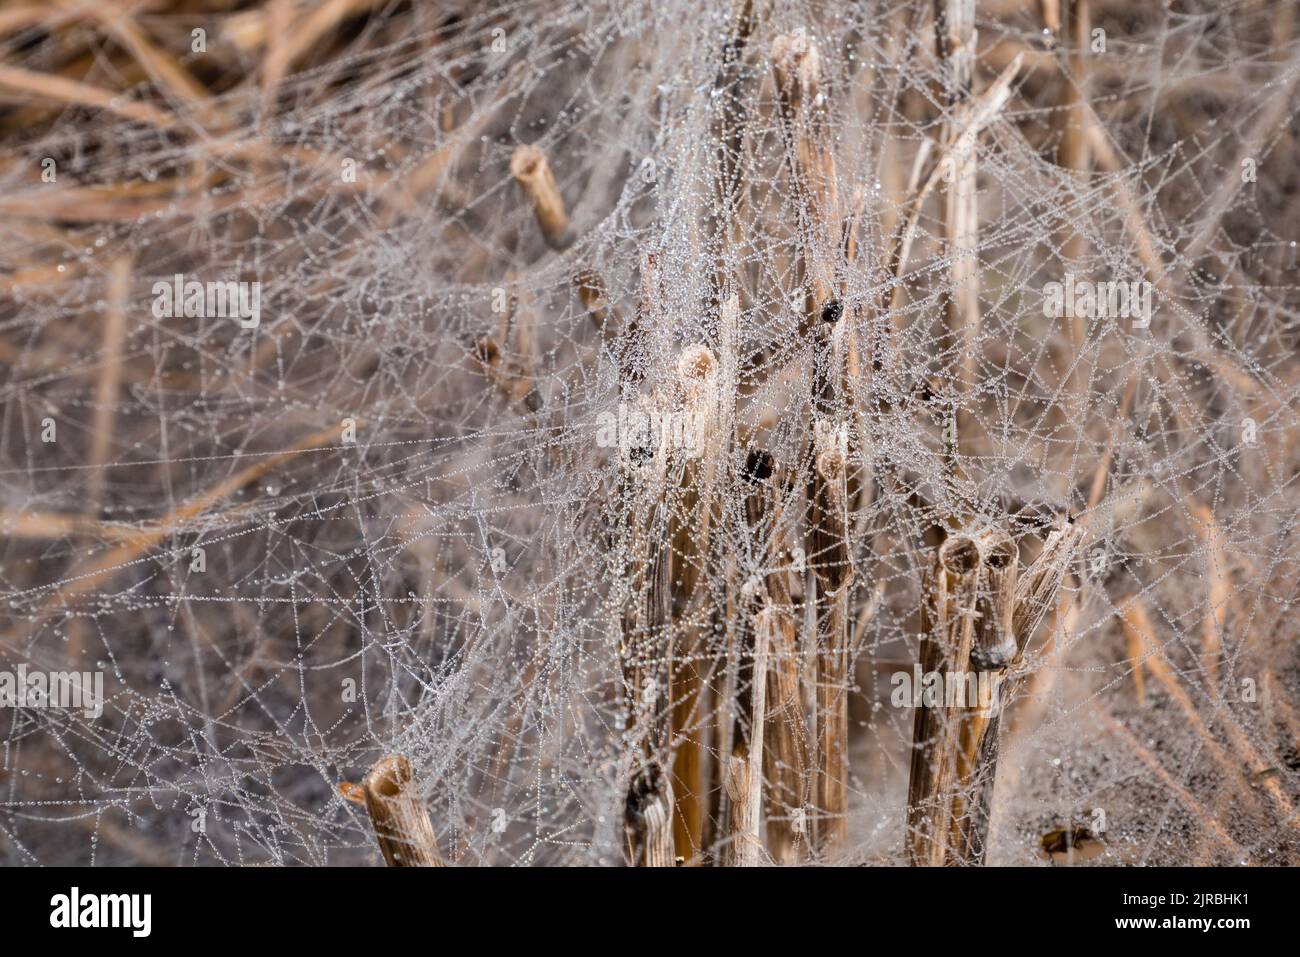 Morning Dew on the spider web. Closeup image, spider web on brown grass Stock Photo